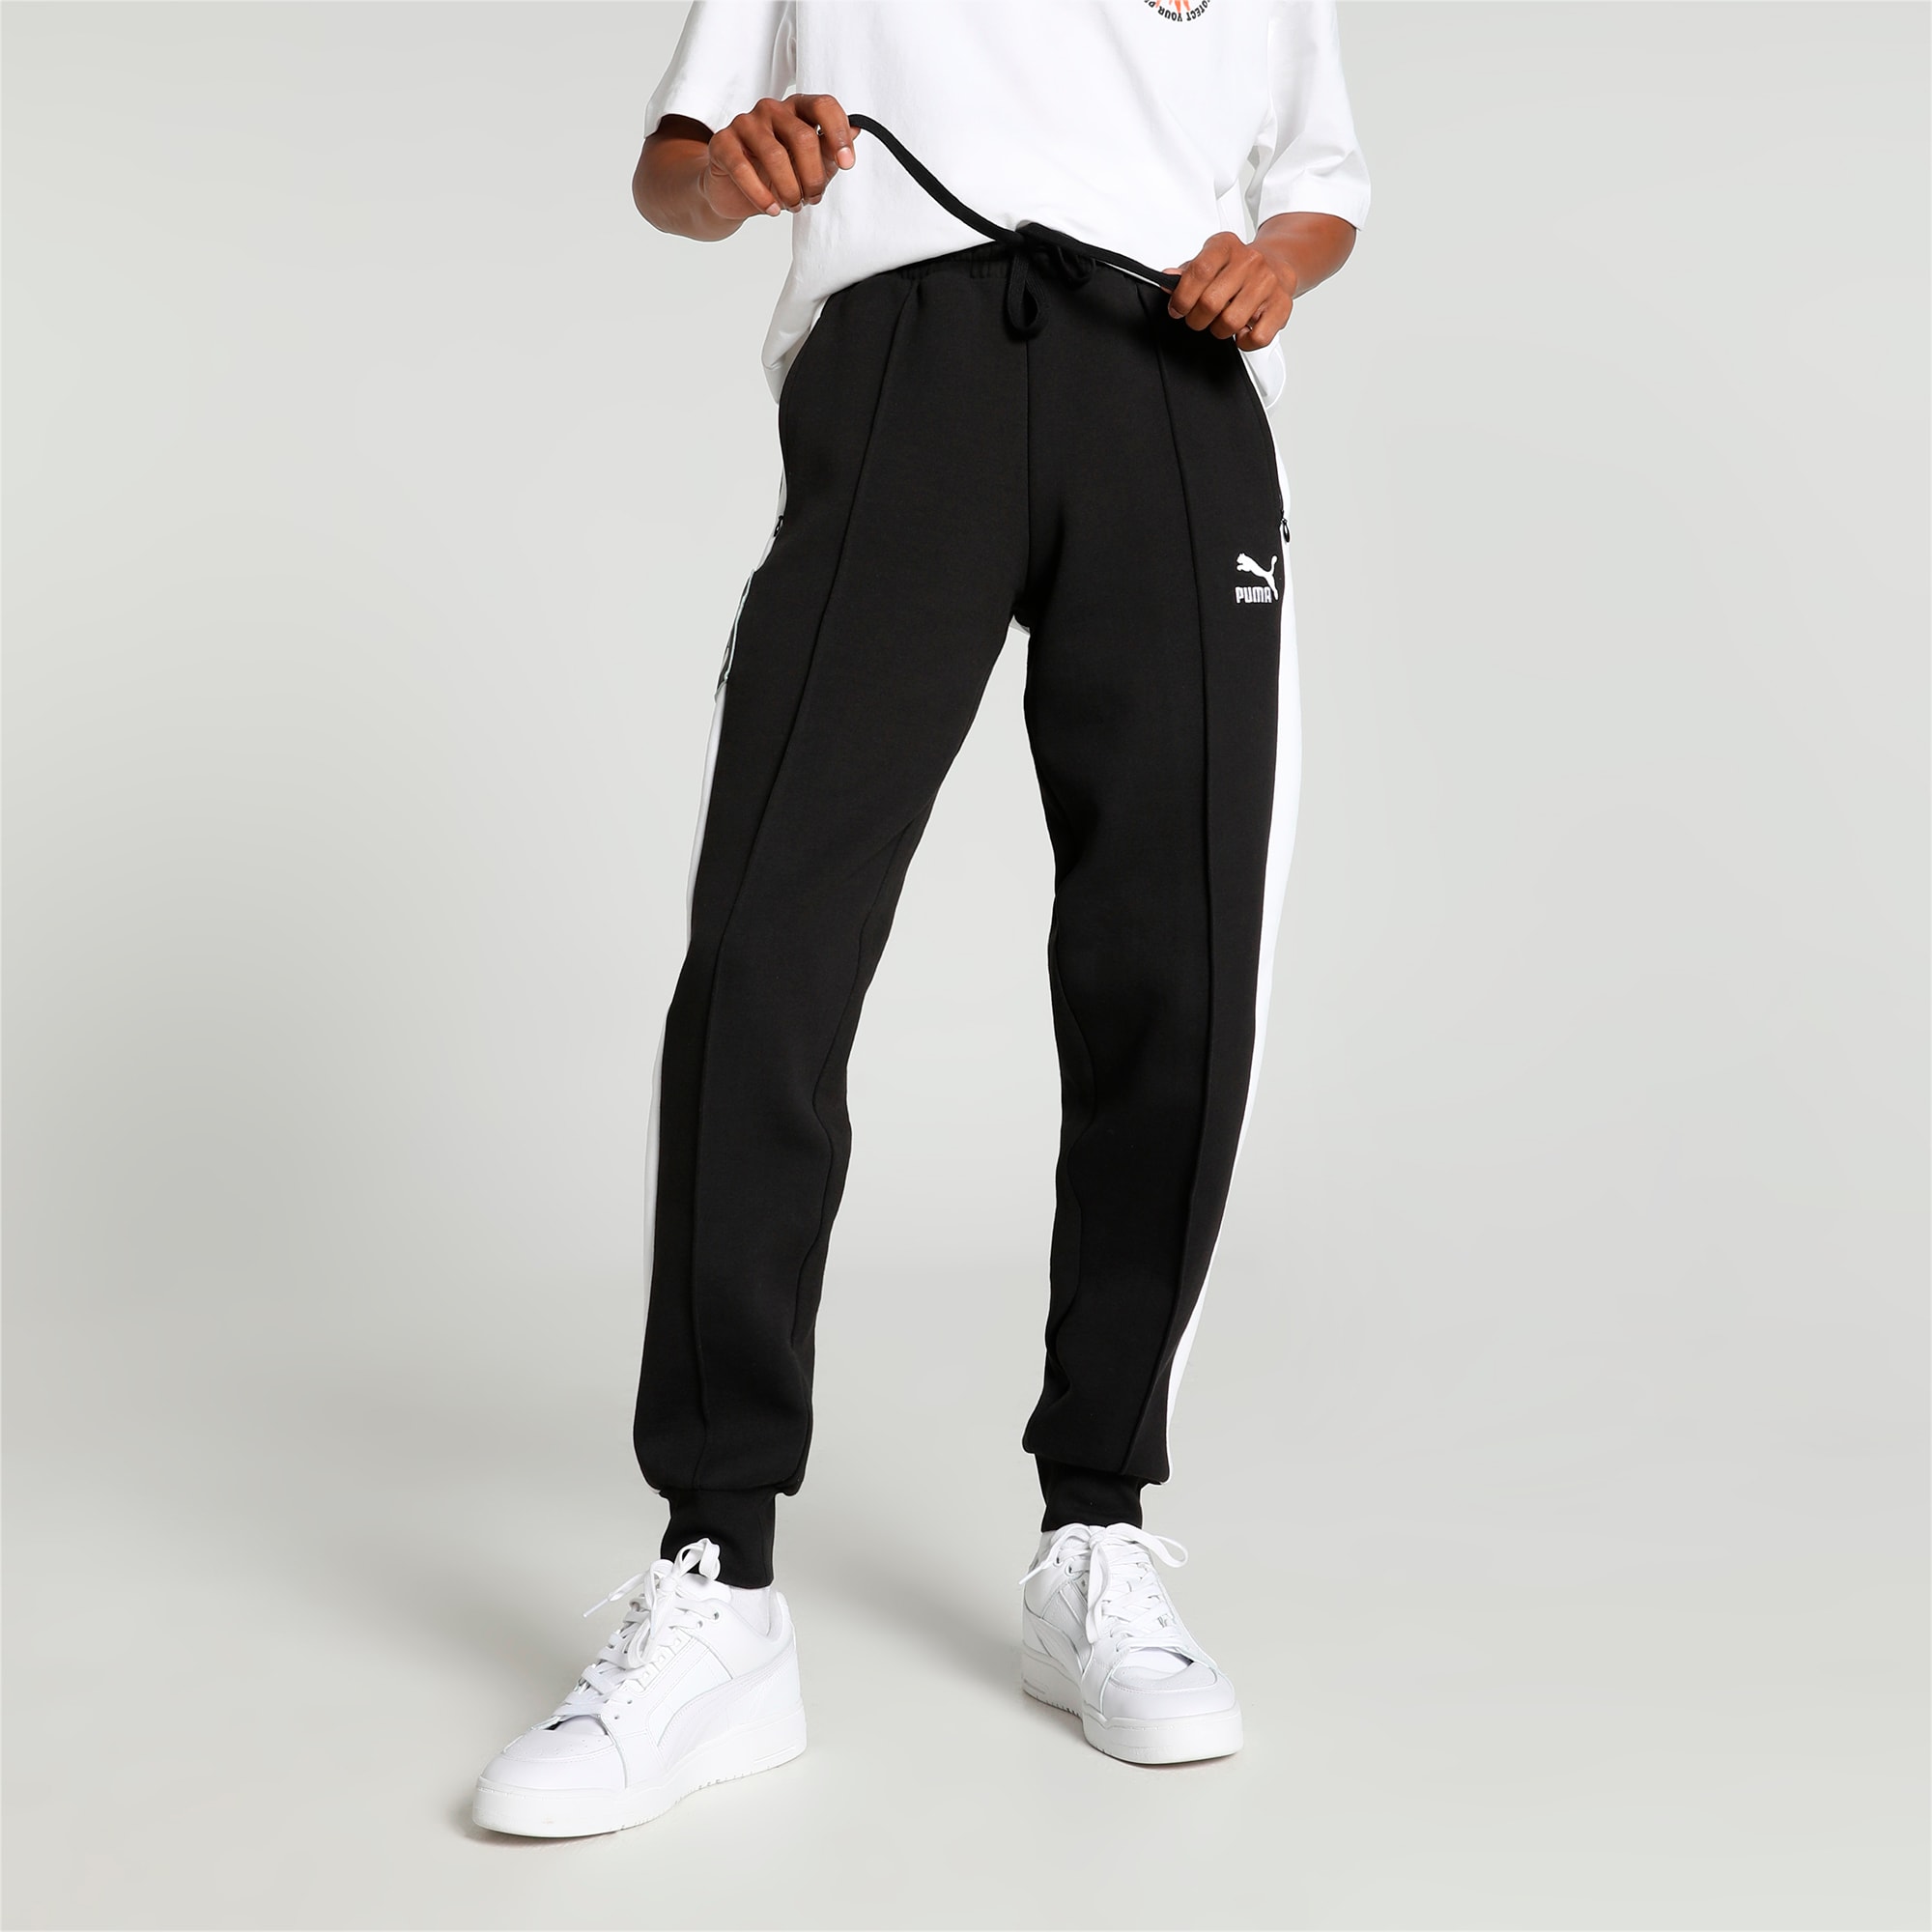 Puma Jersey Track Pants - Buy Puma Jersey Track Pants online in India